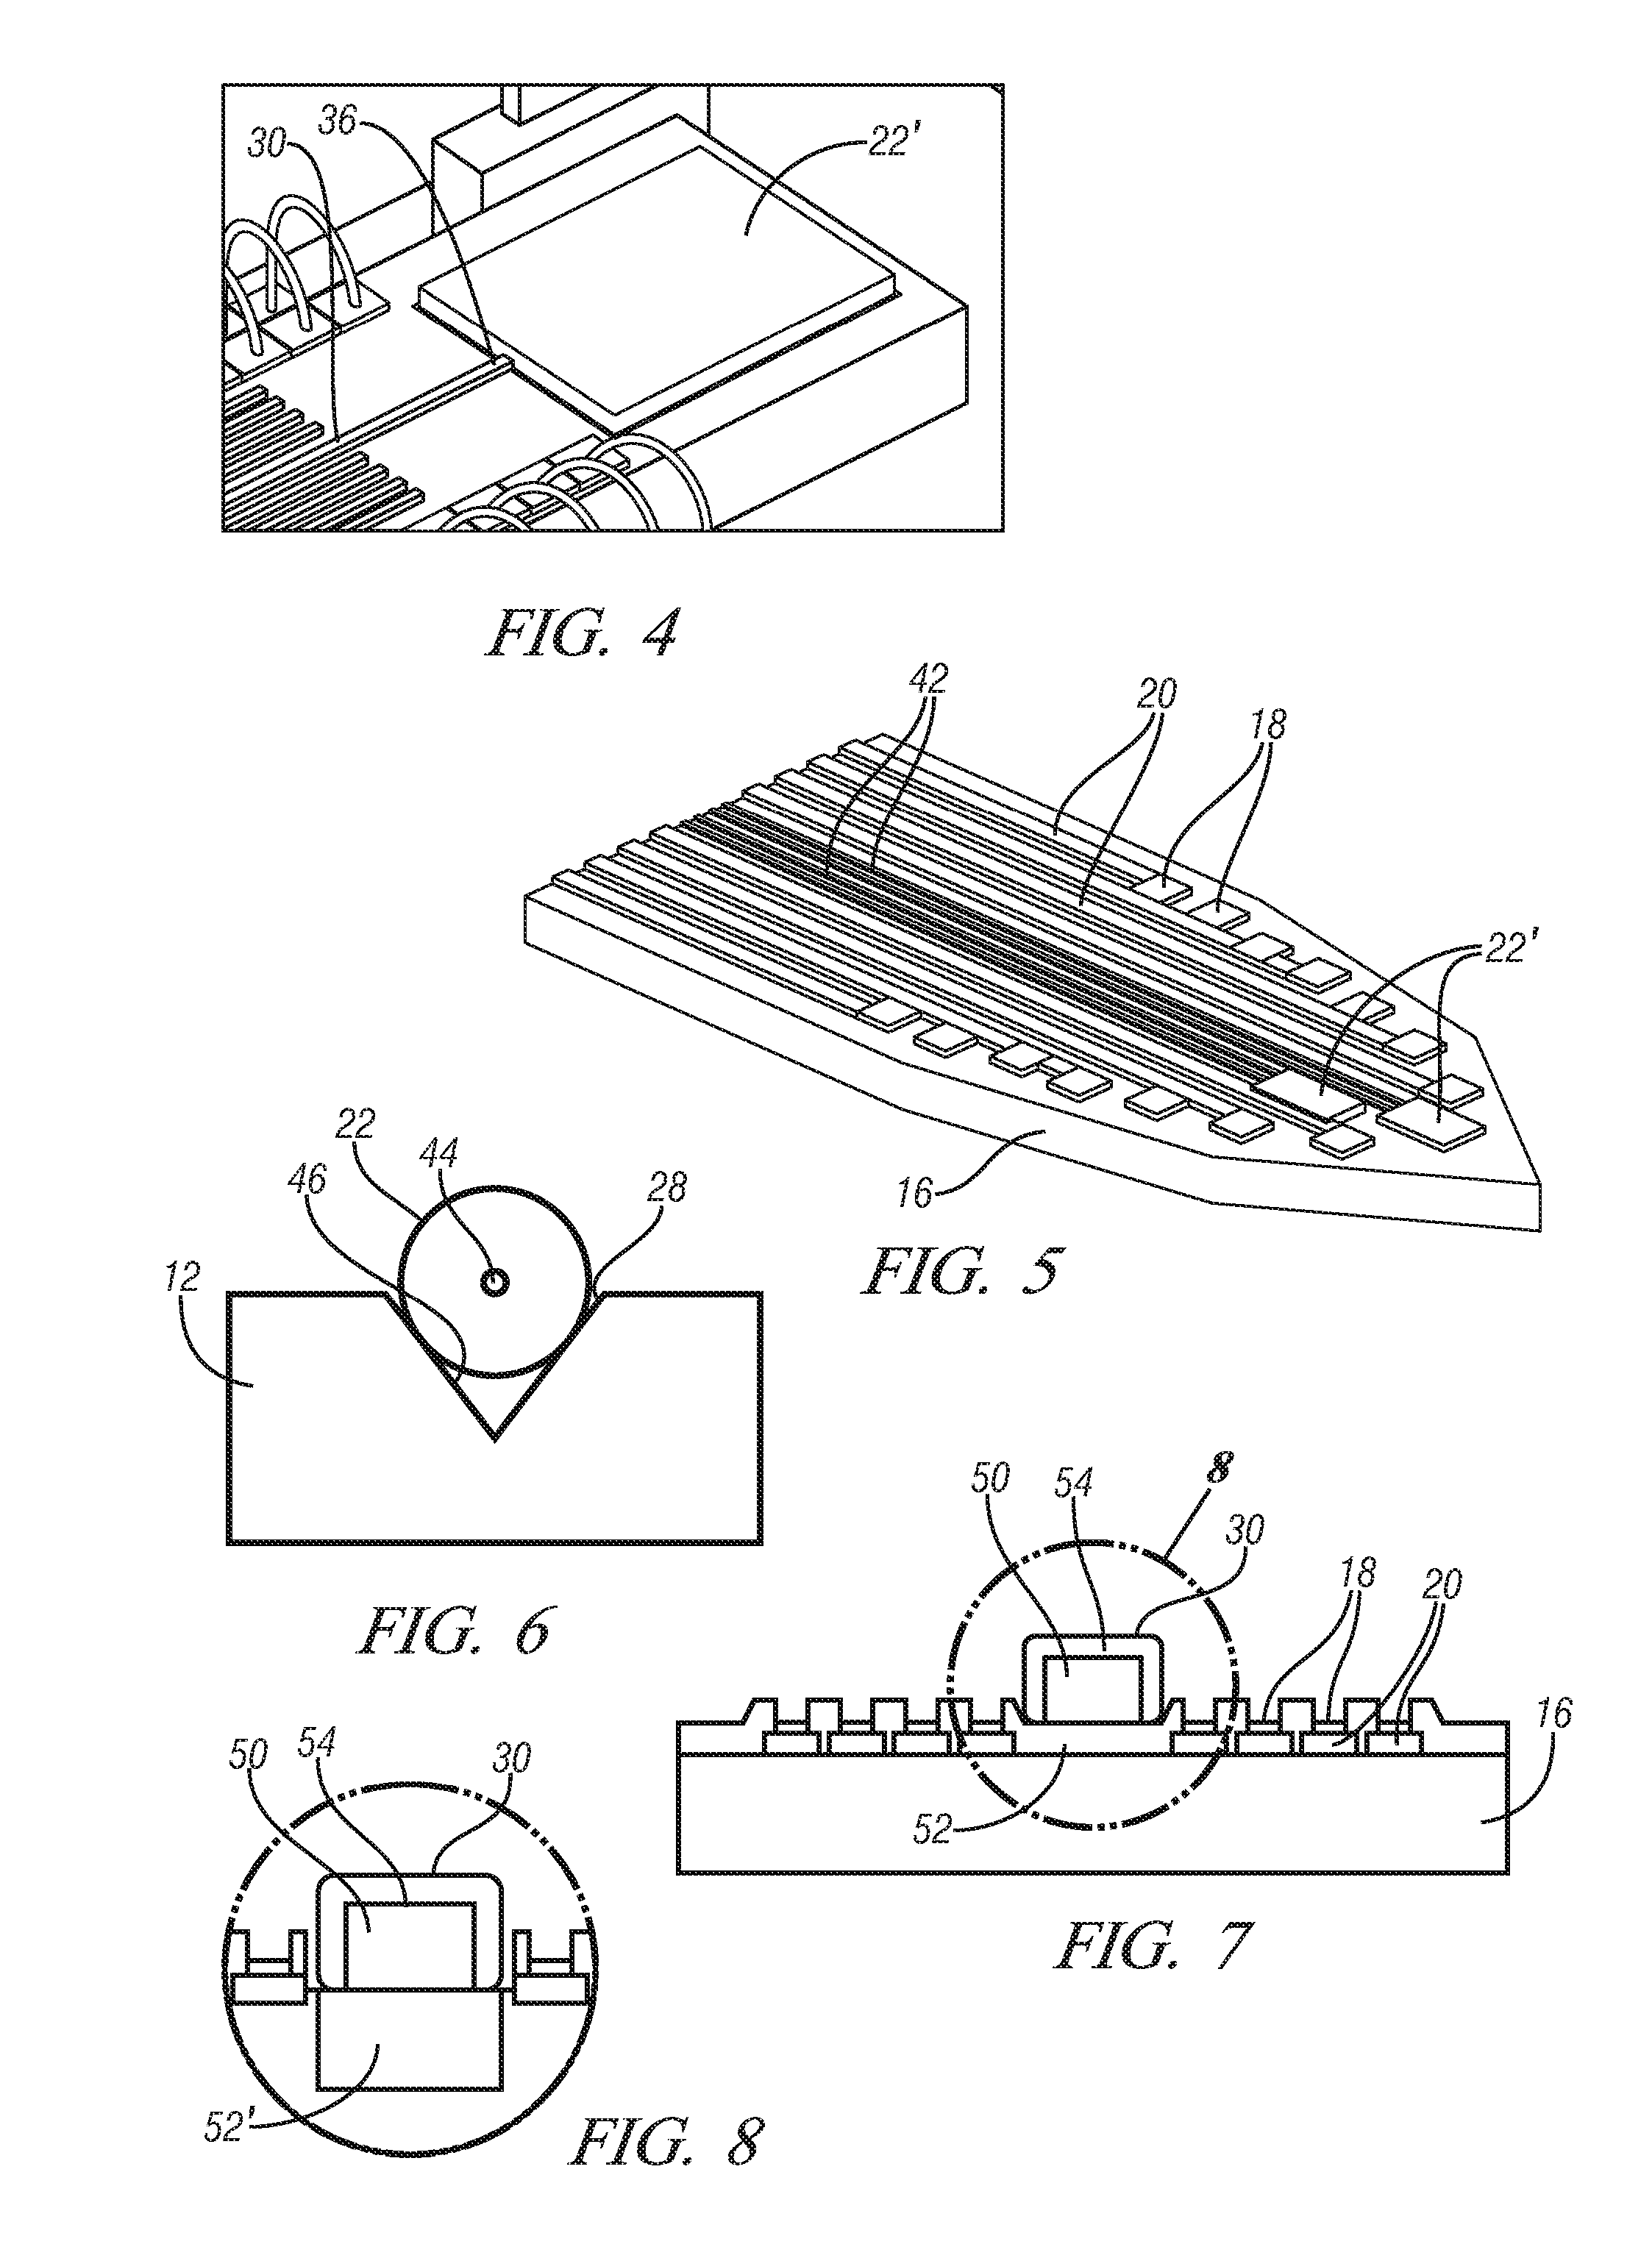 Neural probe with optical stimulation capability